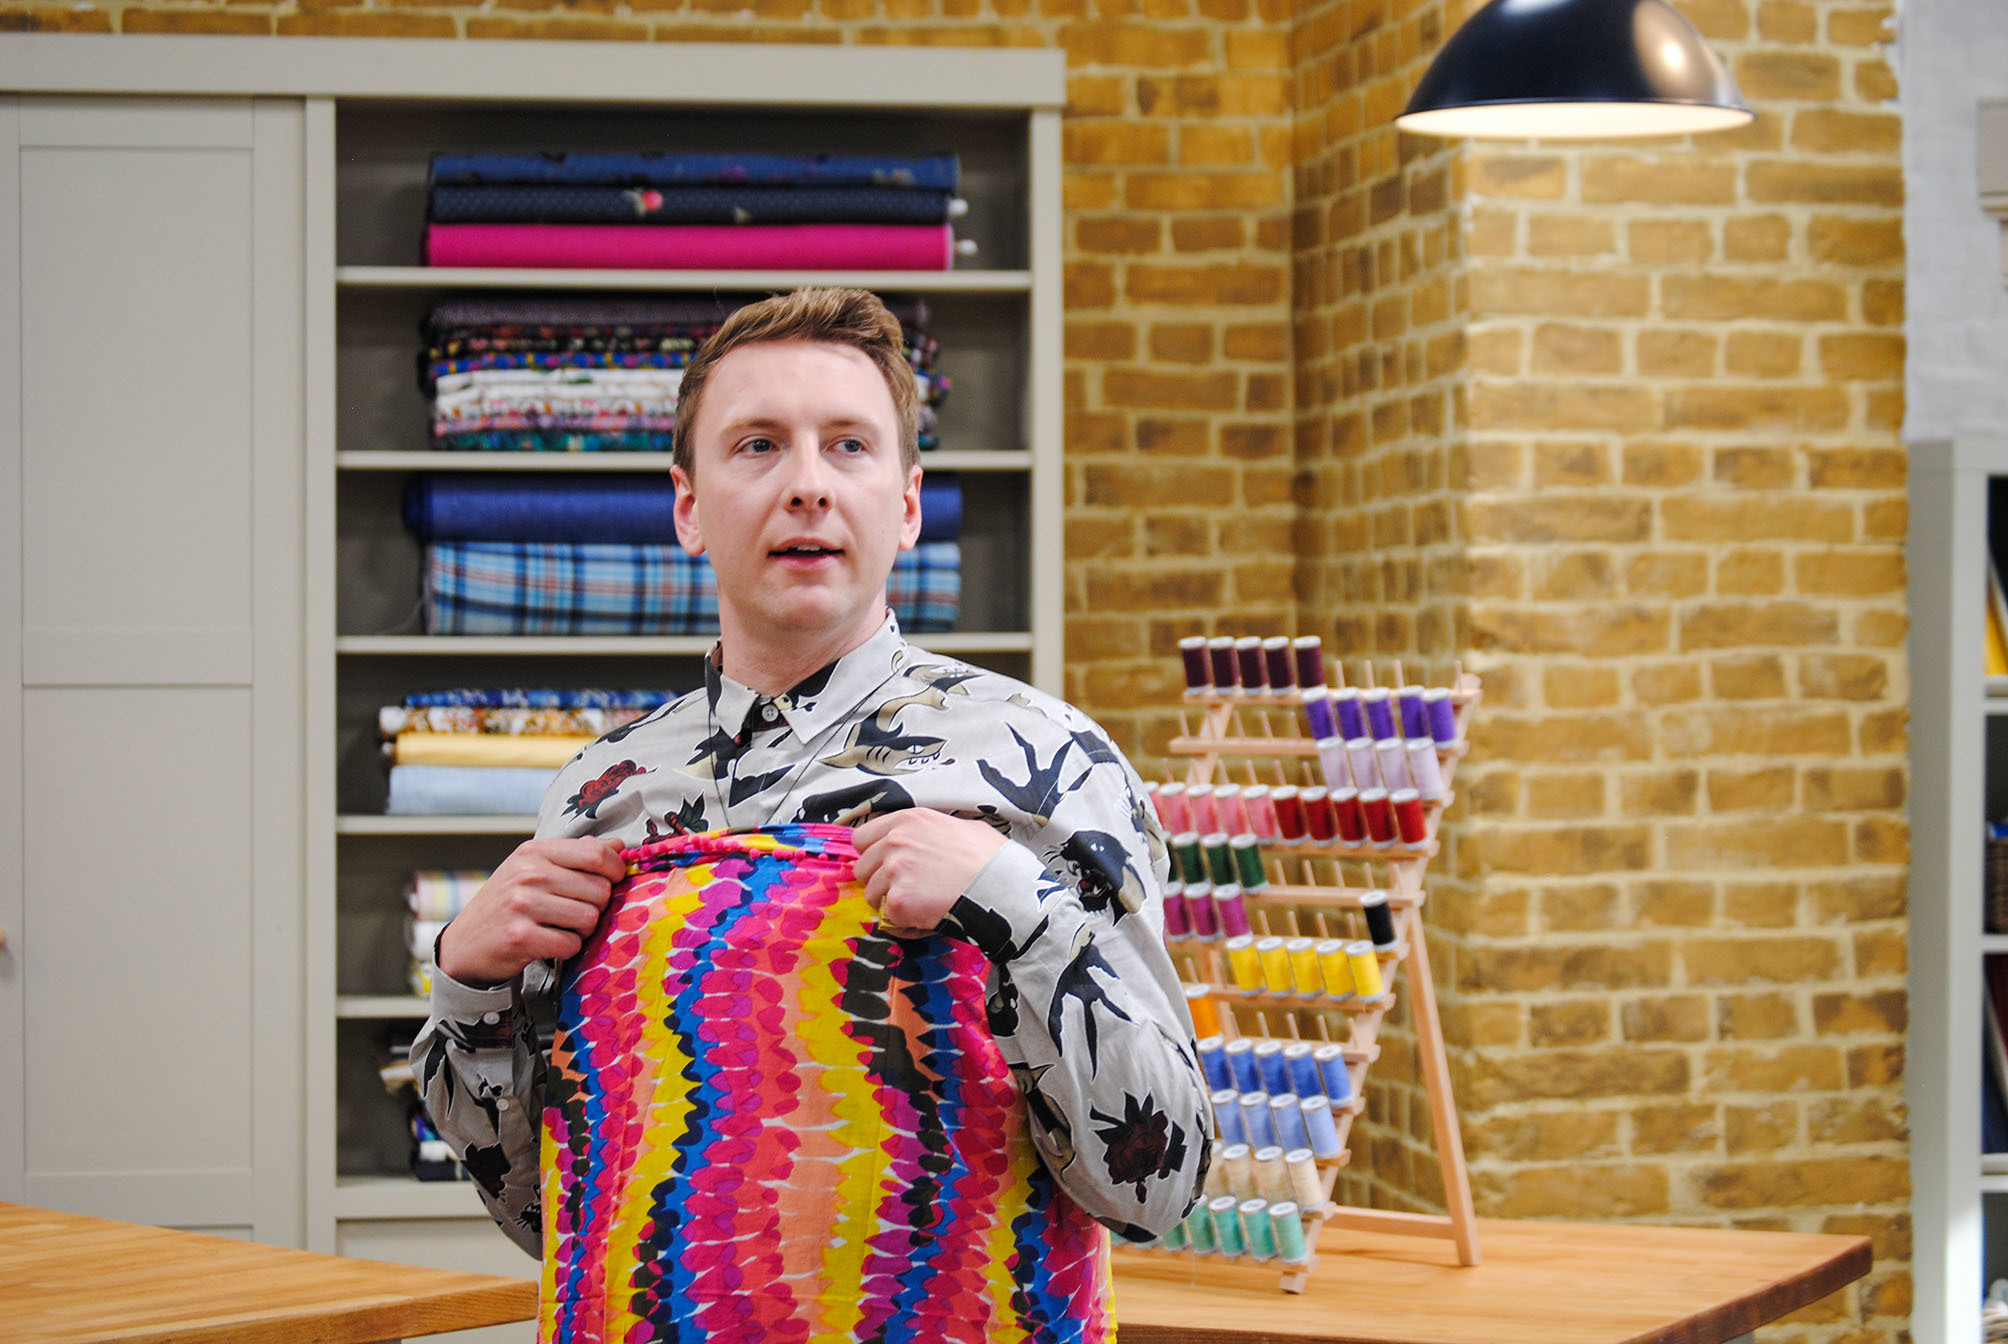 WARNING: Embargoed for publication until 00:00:01 on 27/04/2021 - Programme Name: The Great British Sewing Bee S7 - TX: 05/05/2021 - Episode: The Great British Sewing Bee S7 - Ep4 (No. 4) - Picture Shows: **STRICTLY EMBARGOED NOT FOR PUBLICATION BEFORE